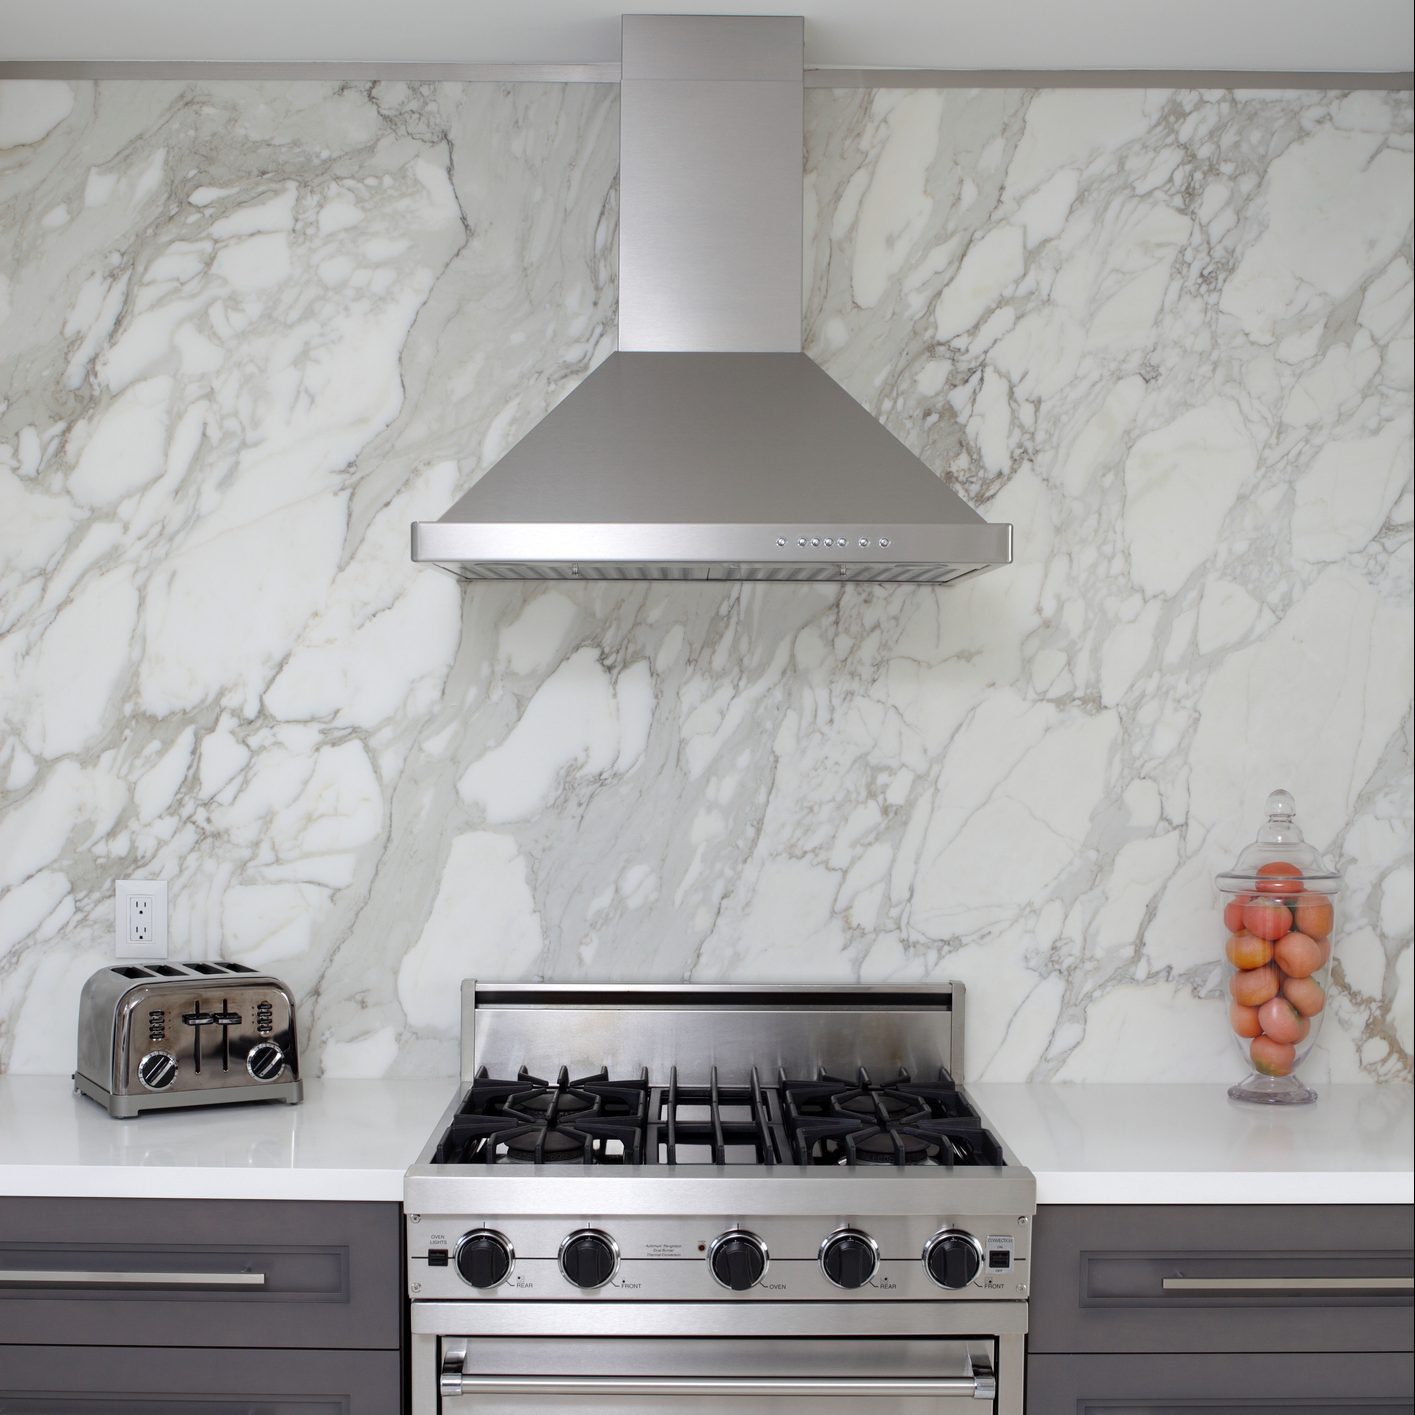 What To Do if Your Range Hood Isn't Working